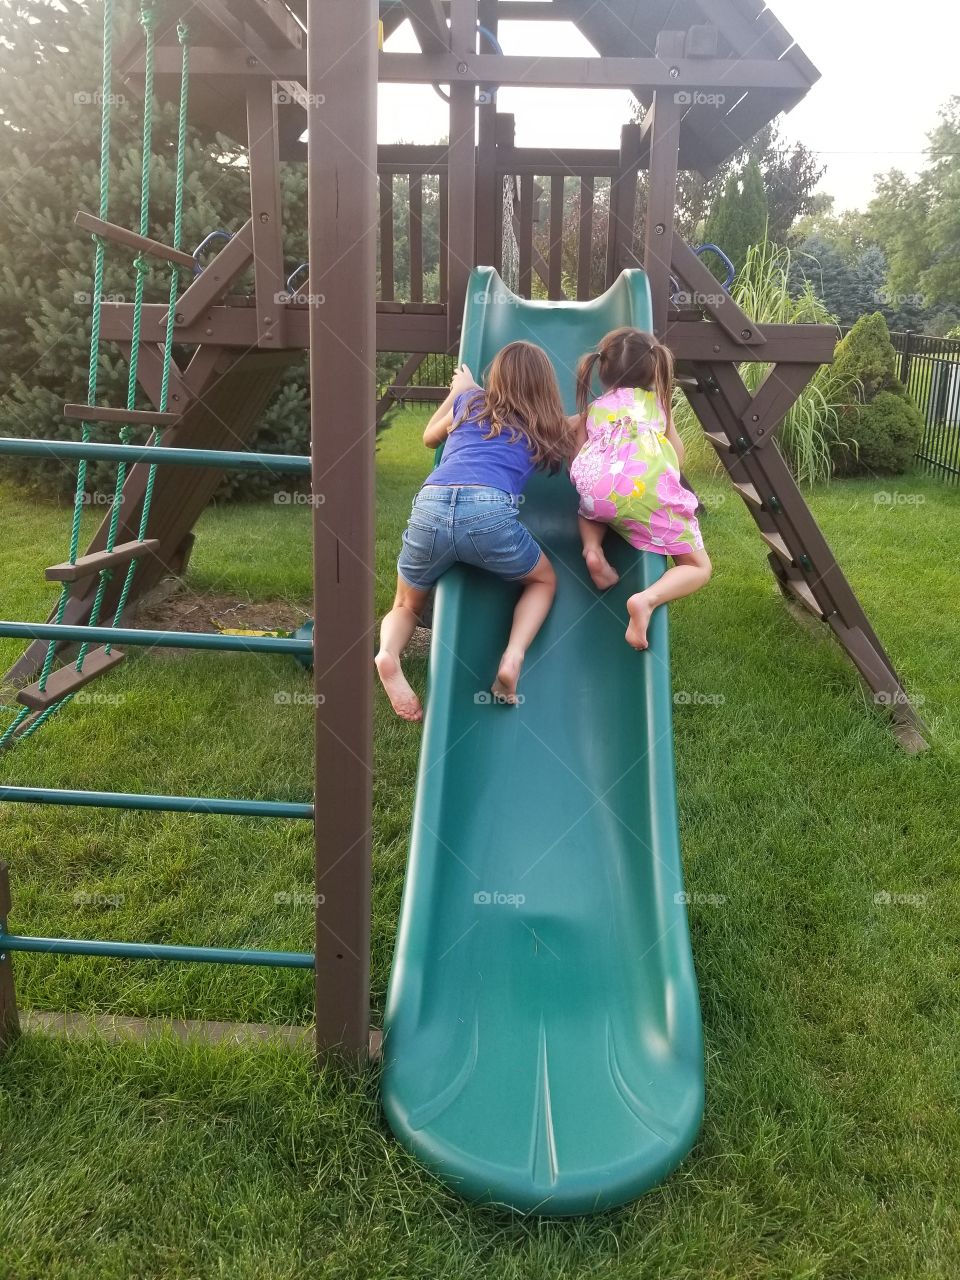 Sister race up the edge of the slide!